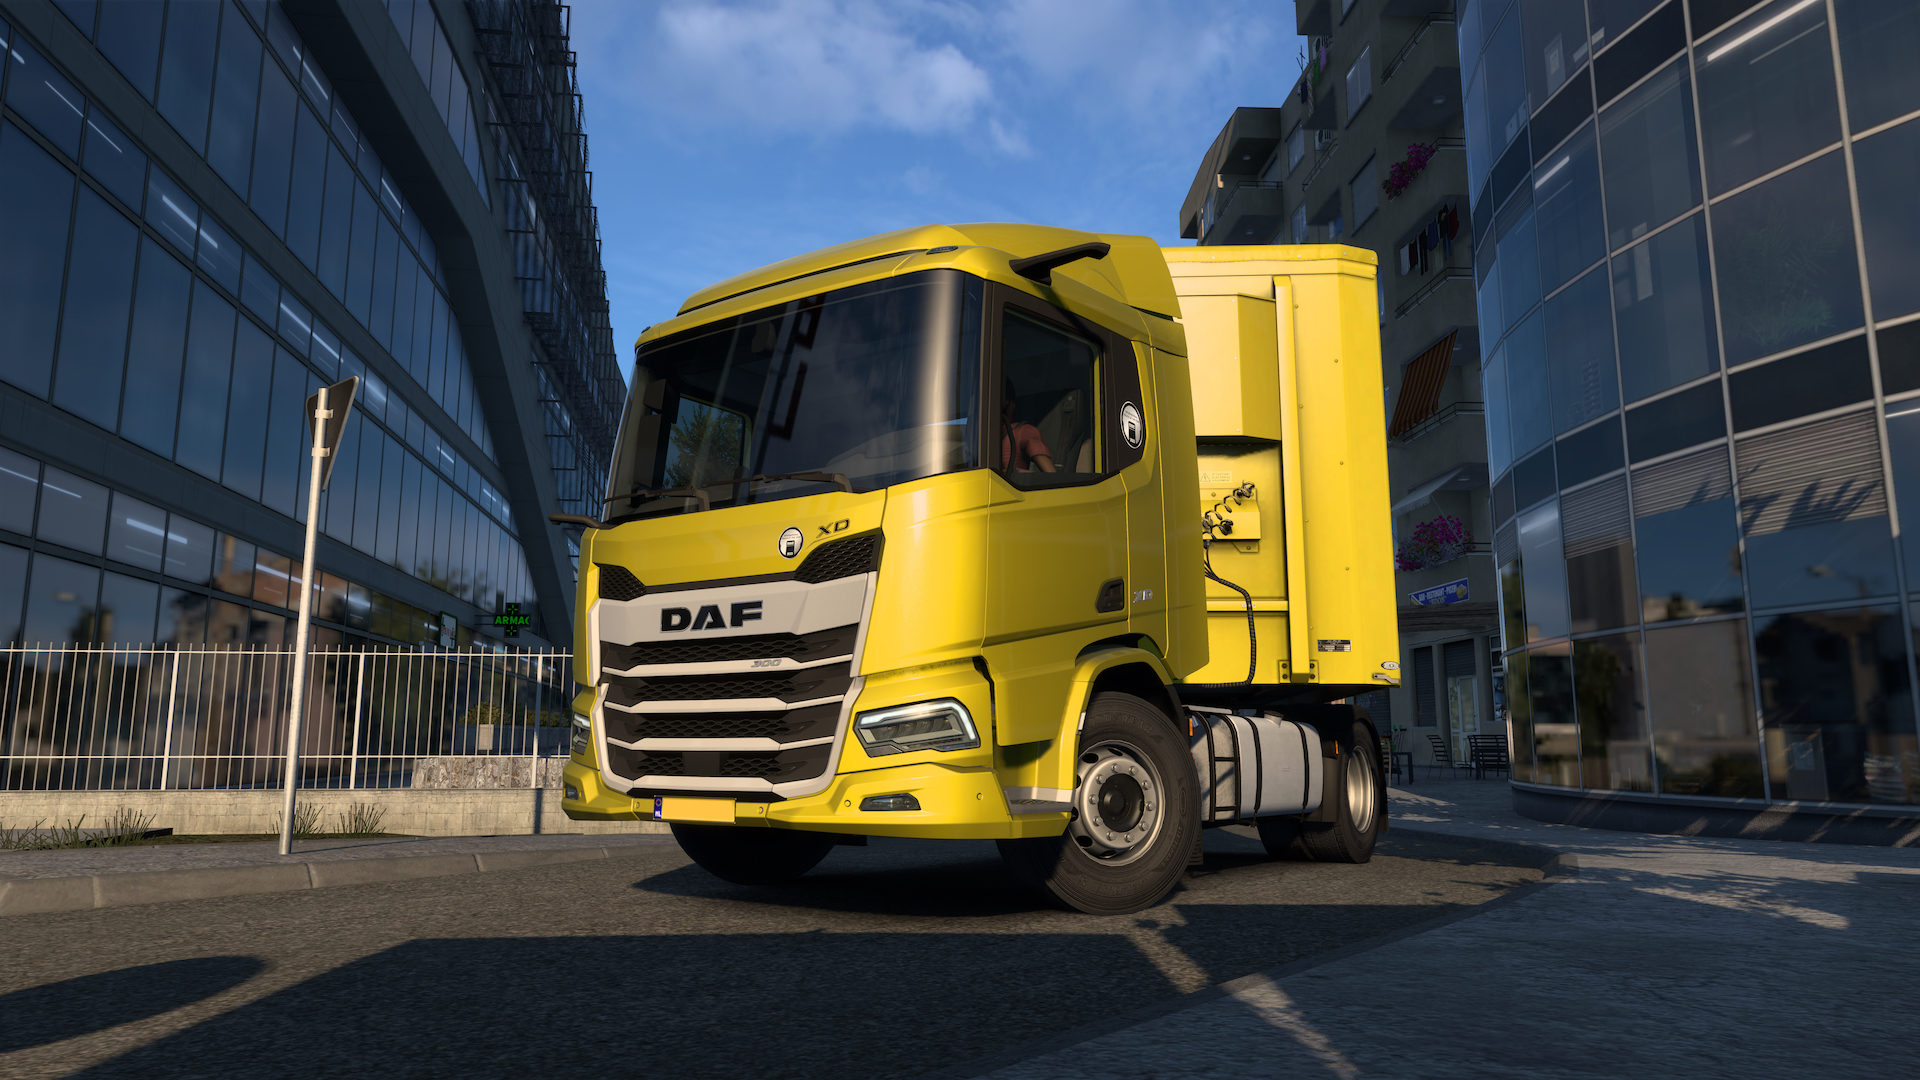 https://www.daf.at/-/media/images/press-releases/milestones/2023/daf-xd-first-ever-distribution-truck-in-ets2.jpg?mw=1920&rev=efcb775a647d40d99b6de78a12930186&hash=D768F11B2279463AA26D7AA9AD0EB3D7